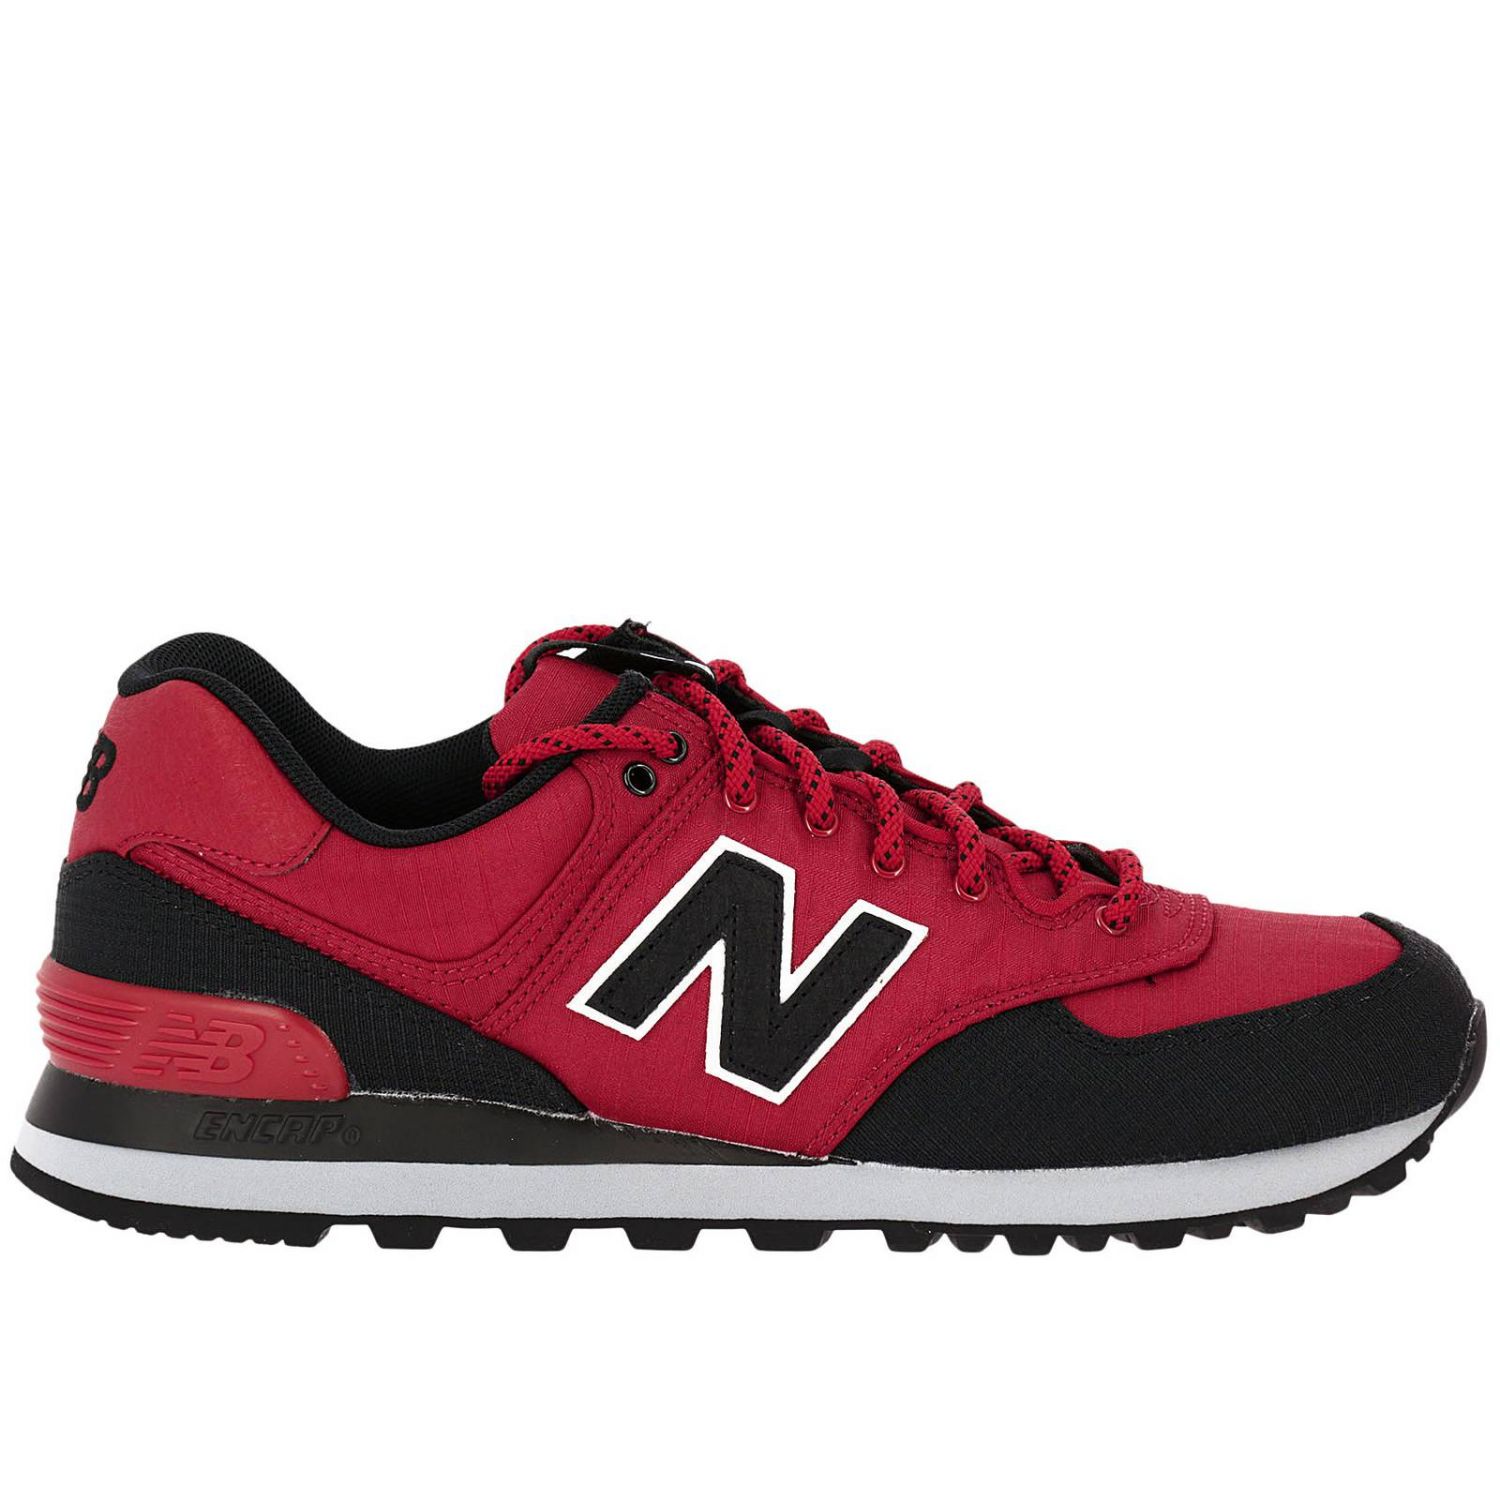 New Balance Outlet: Sneakers men | Trainers New Balance Men Red ...